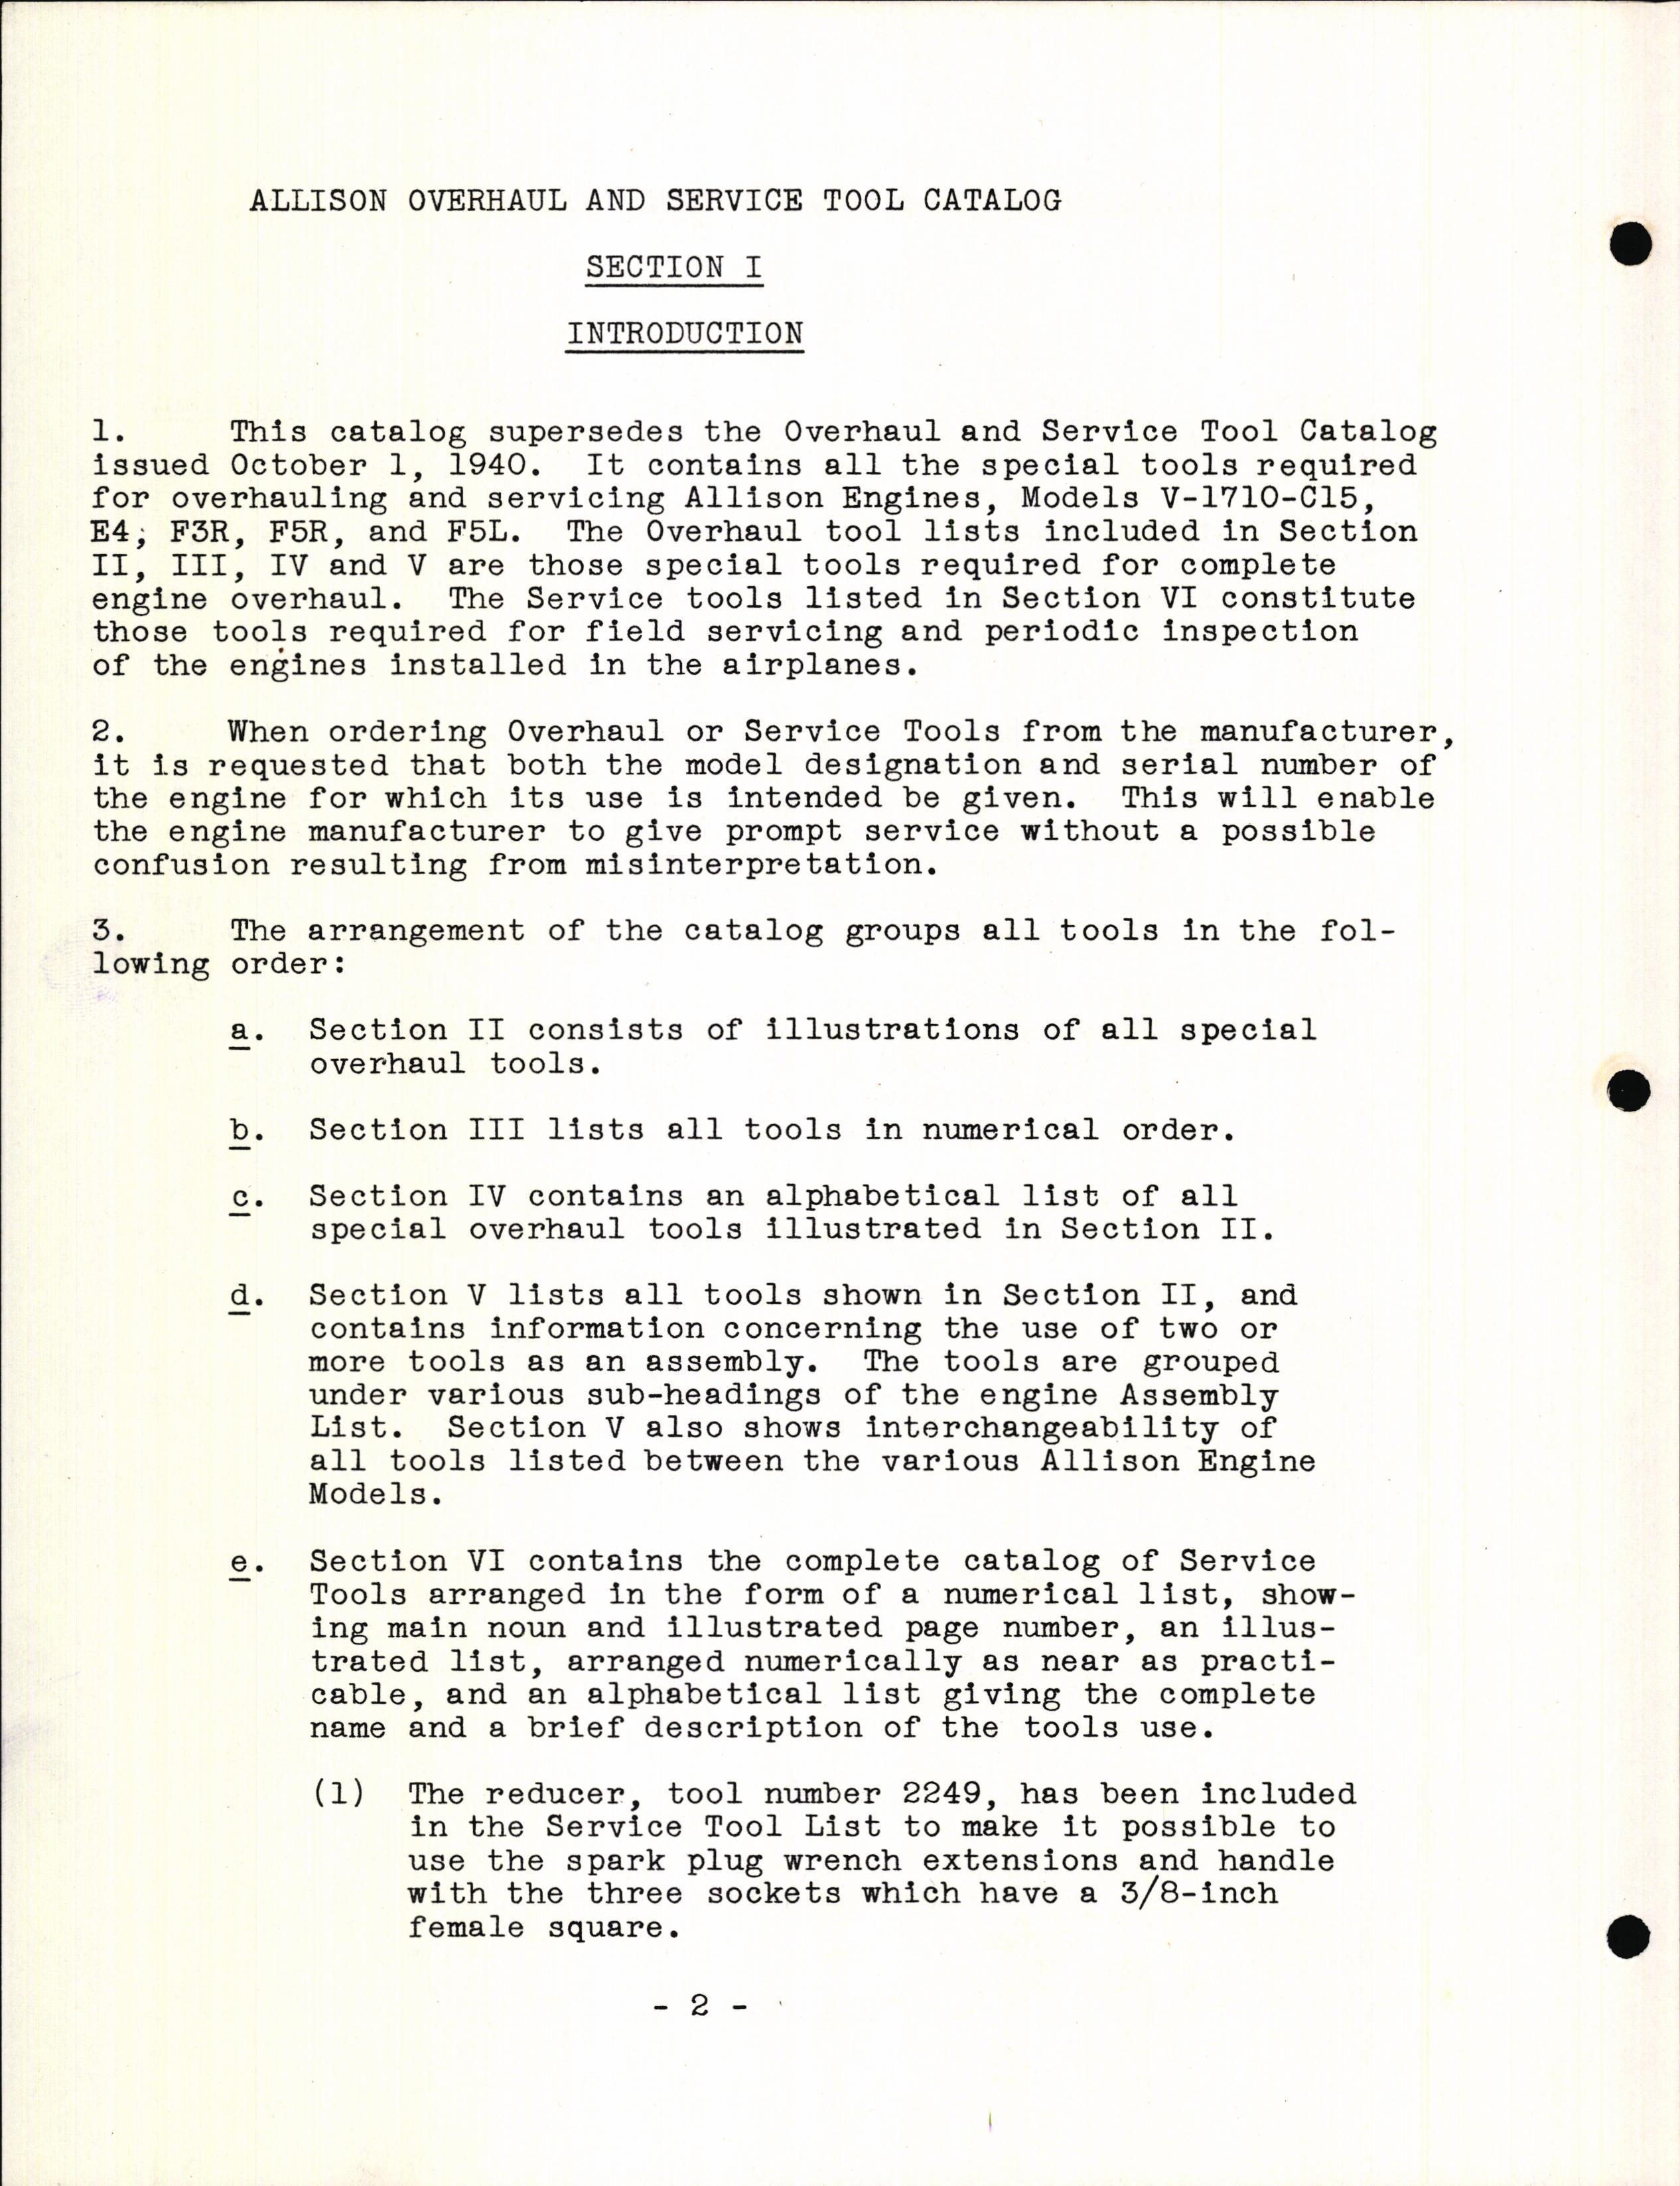 Sample page 4 from AirCorps Library document: Commercial Overhaul and Service Tool Catalog for Allison Engines